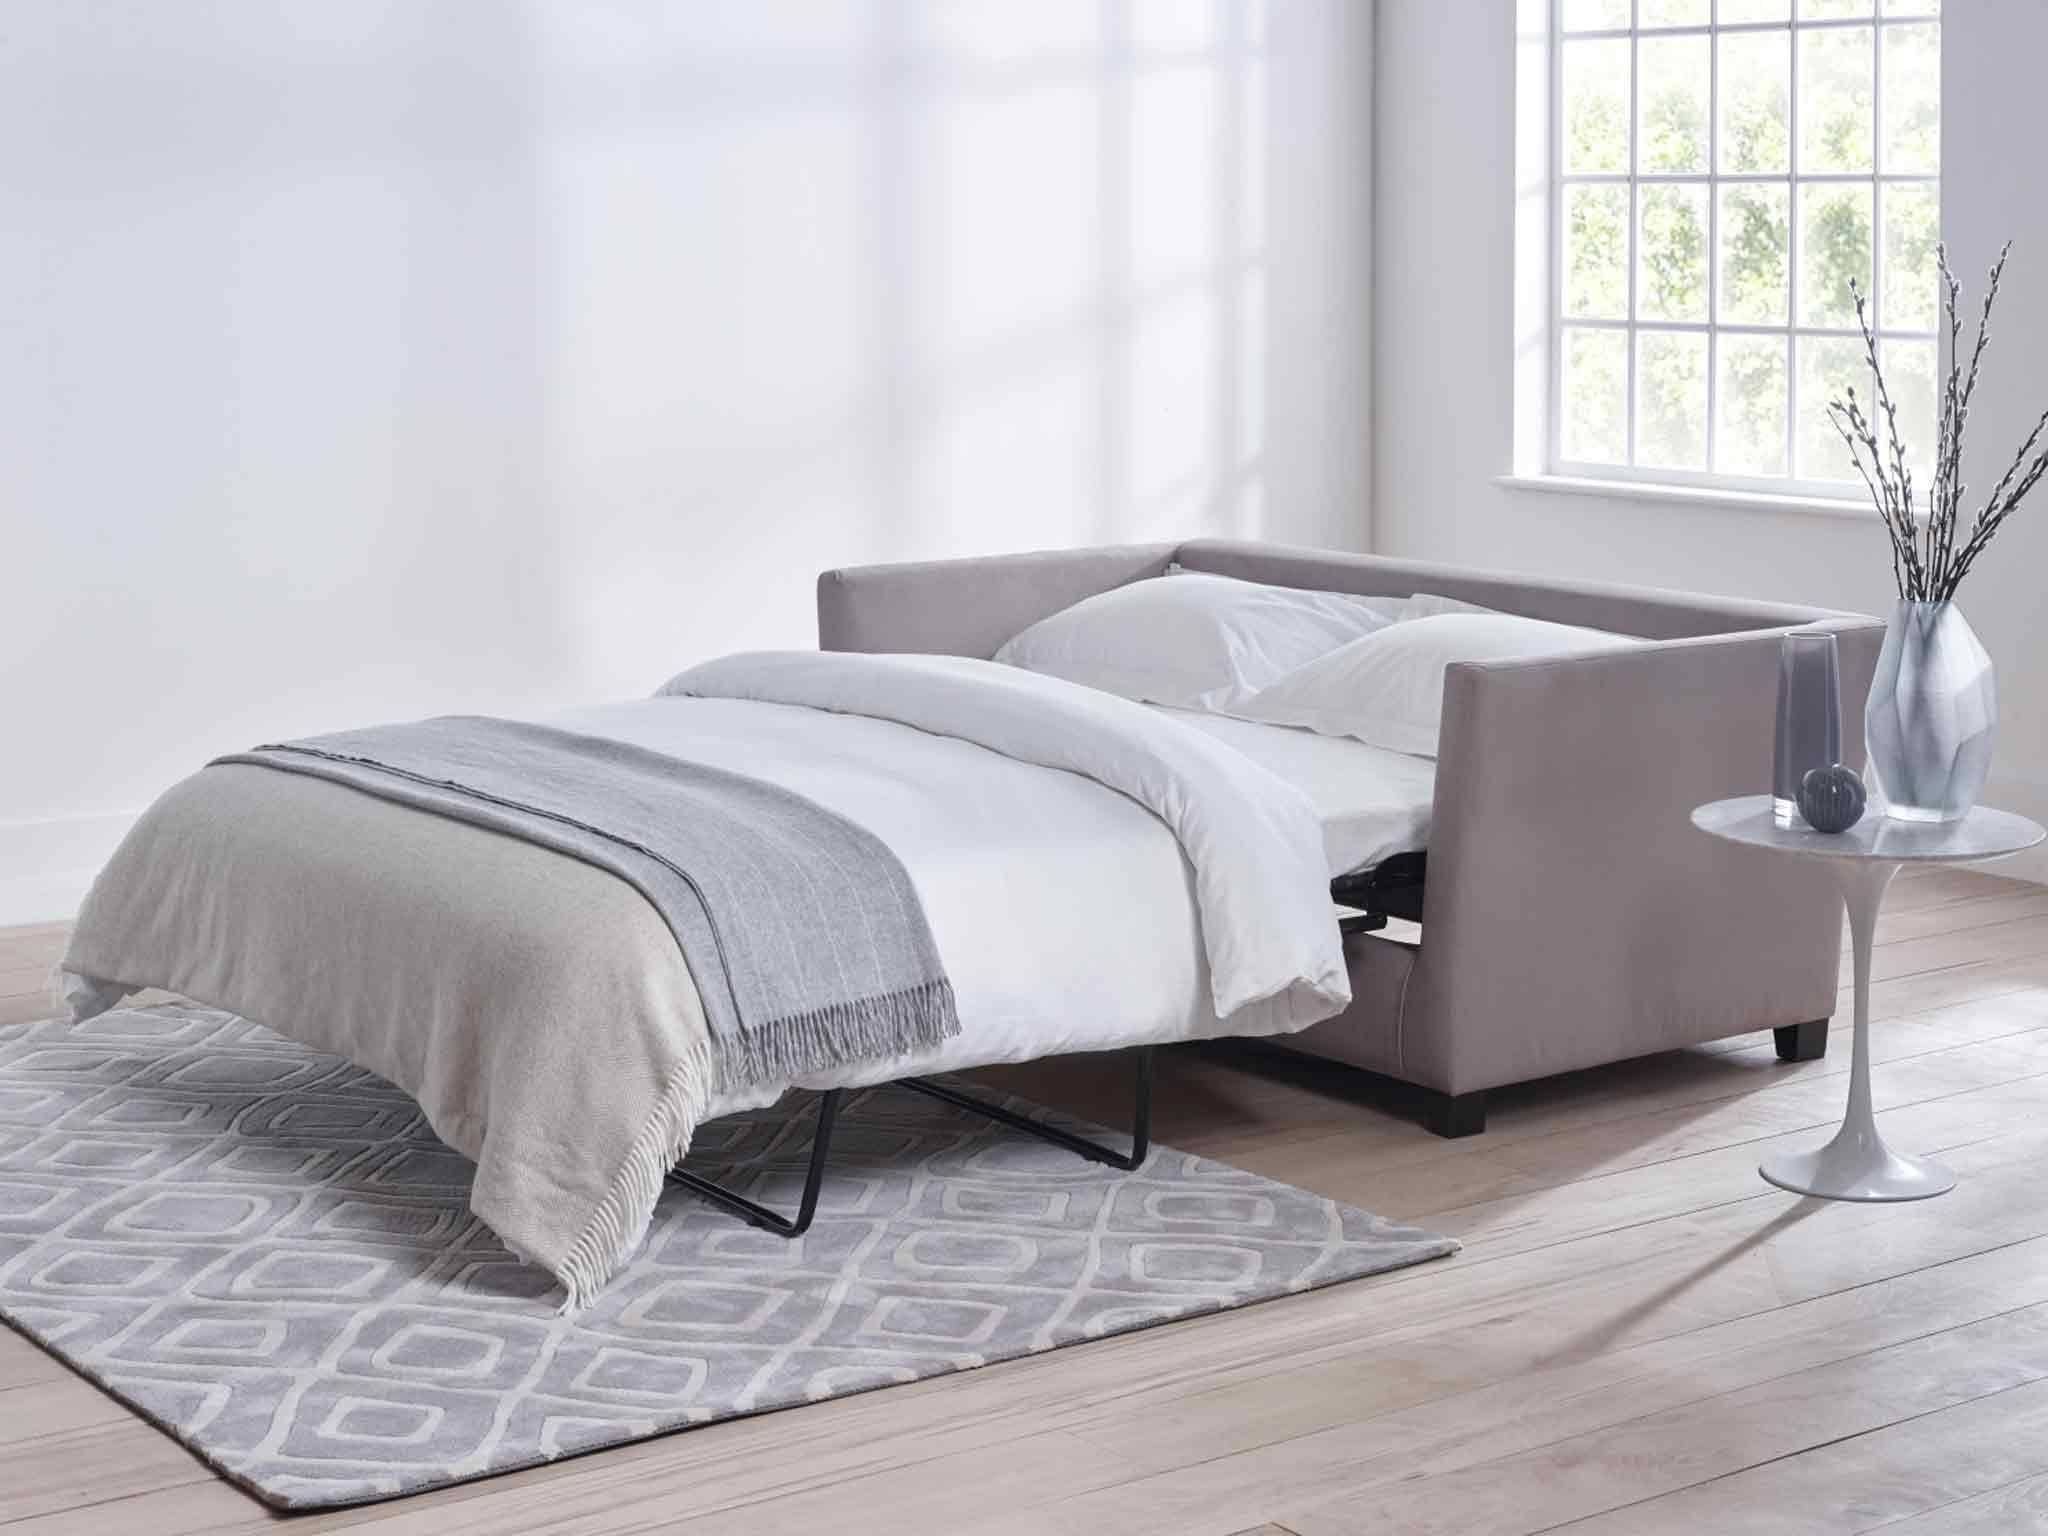 10 Best Sofa Beds | The Independent Intended For Electric Sofa Beds (View 6 of 15)